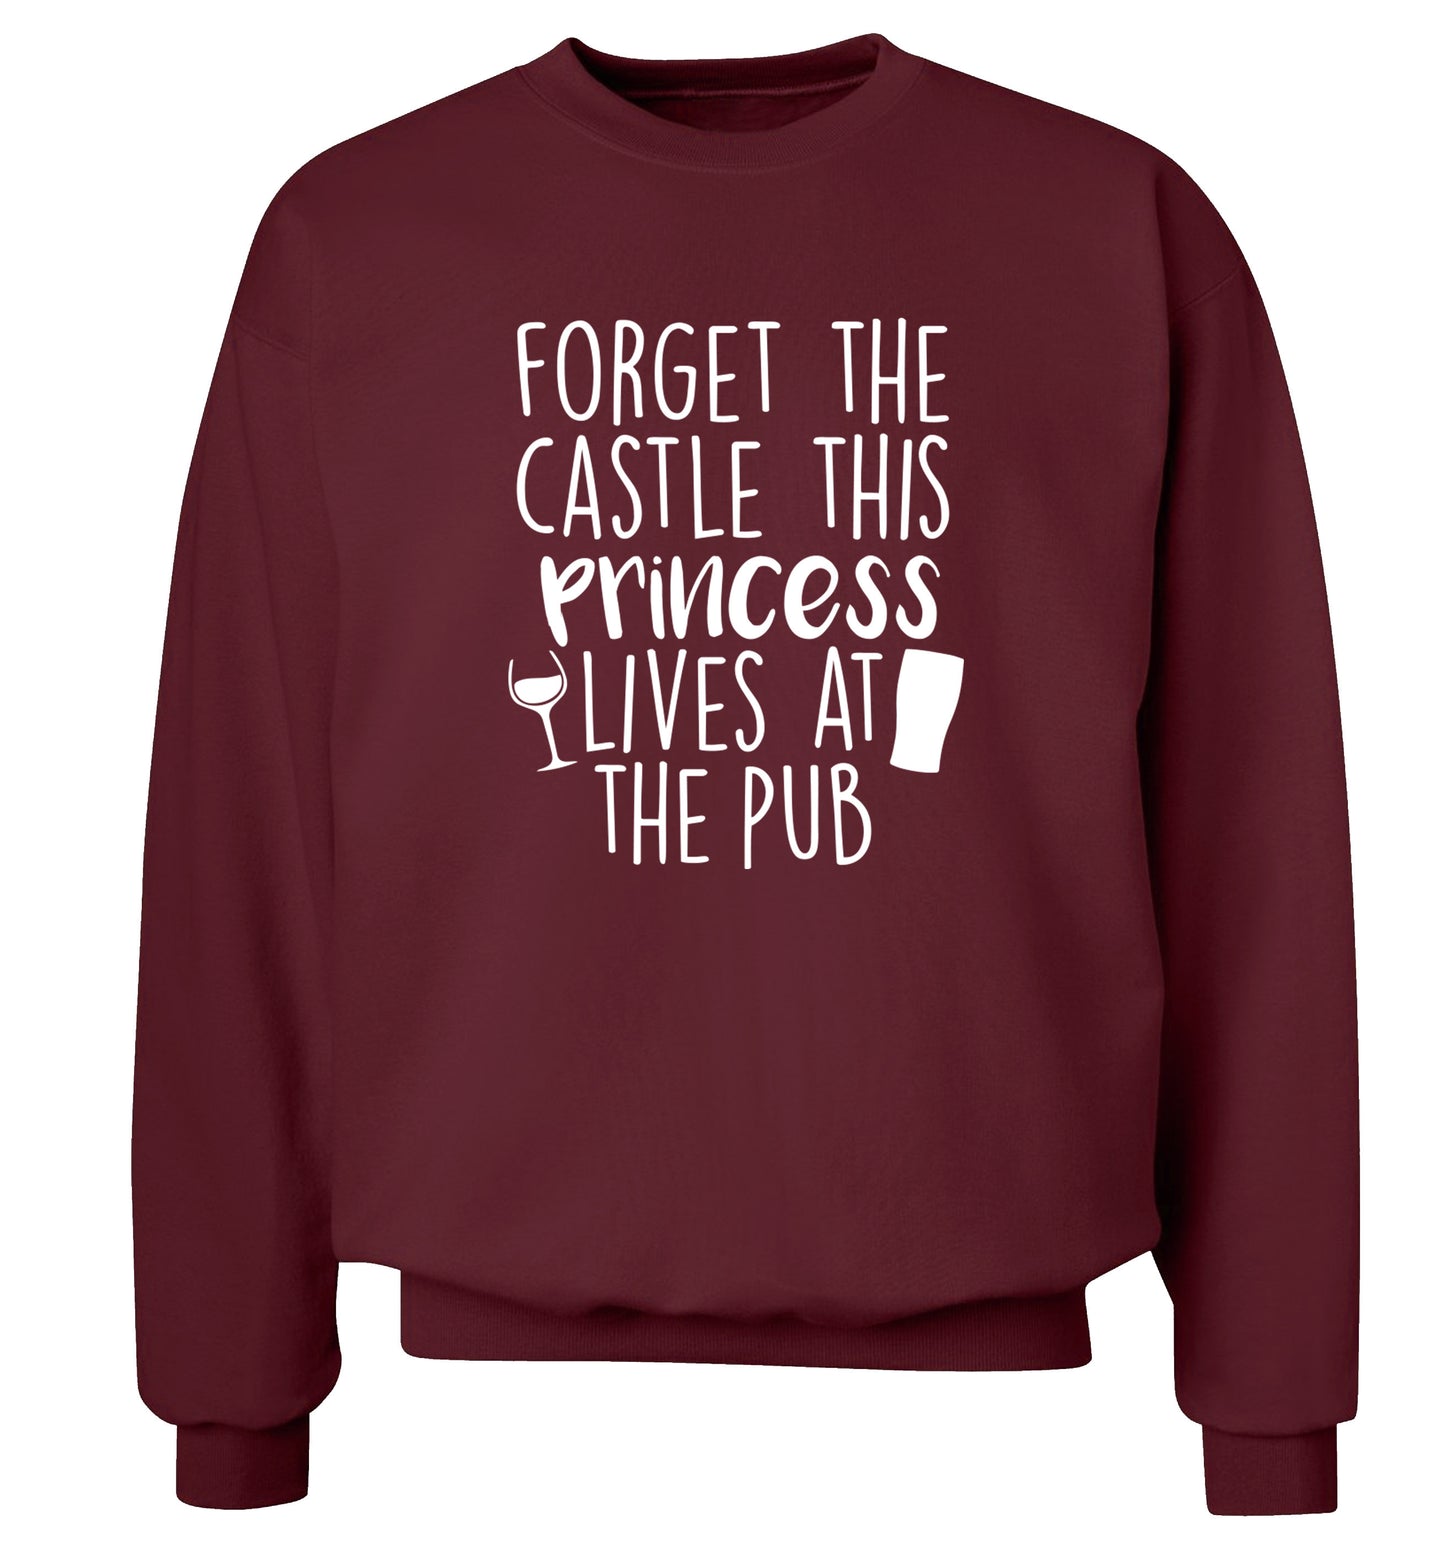 Forget the castle this princess lives at the pub Adult's unisex maroon Sweater 2XL